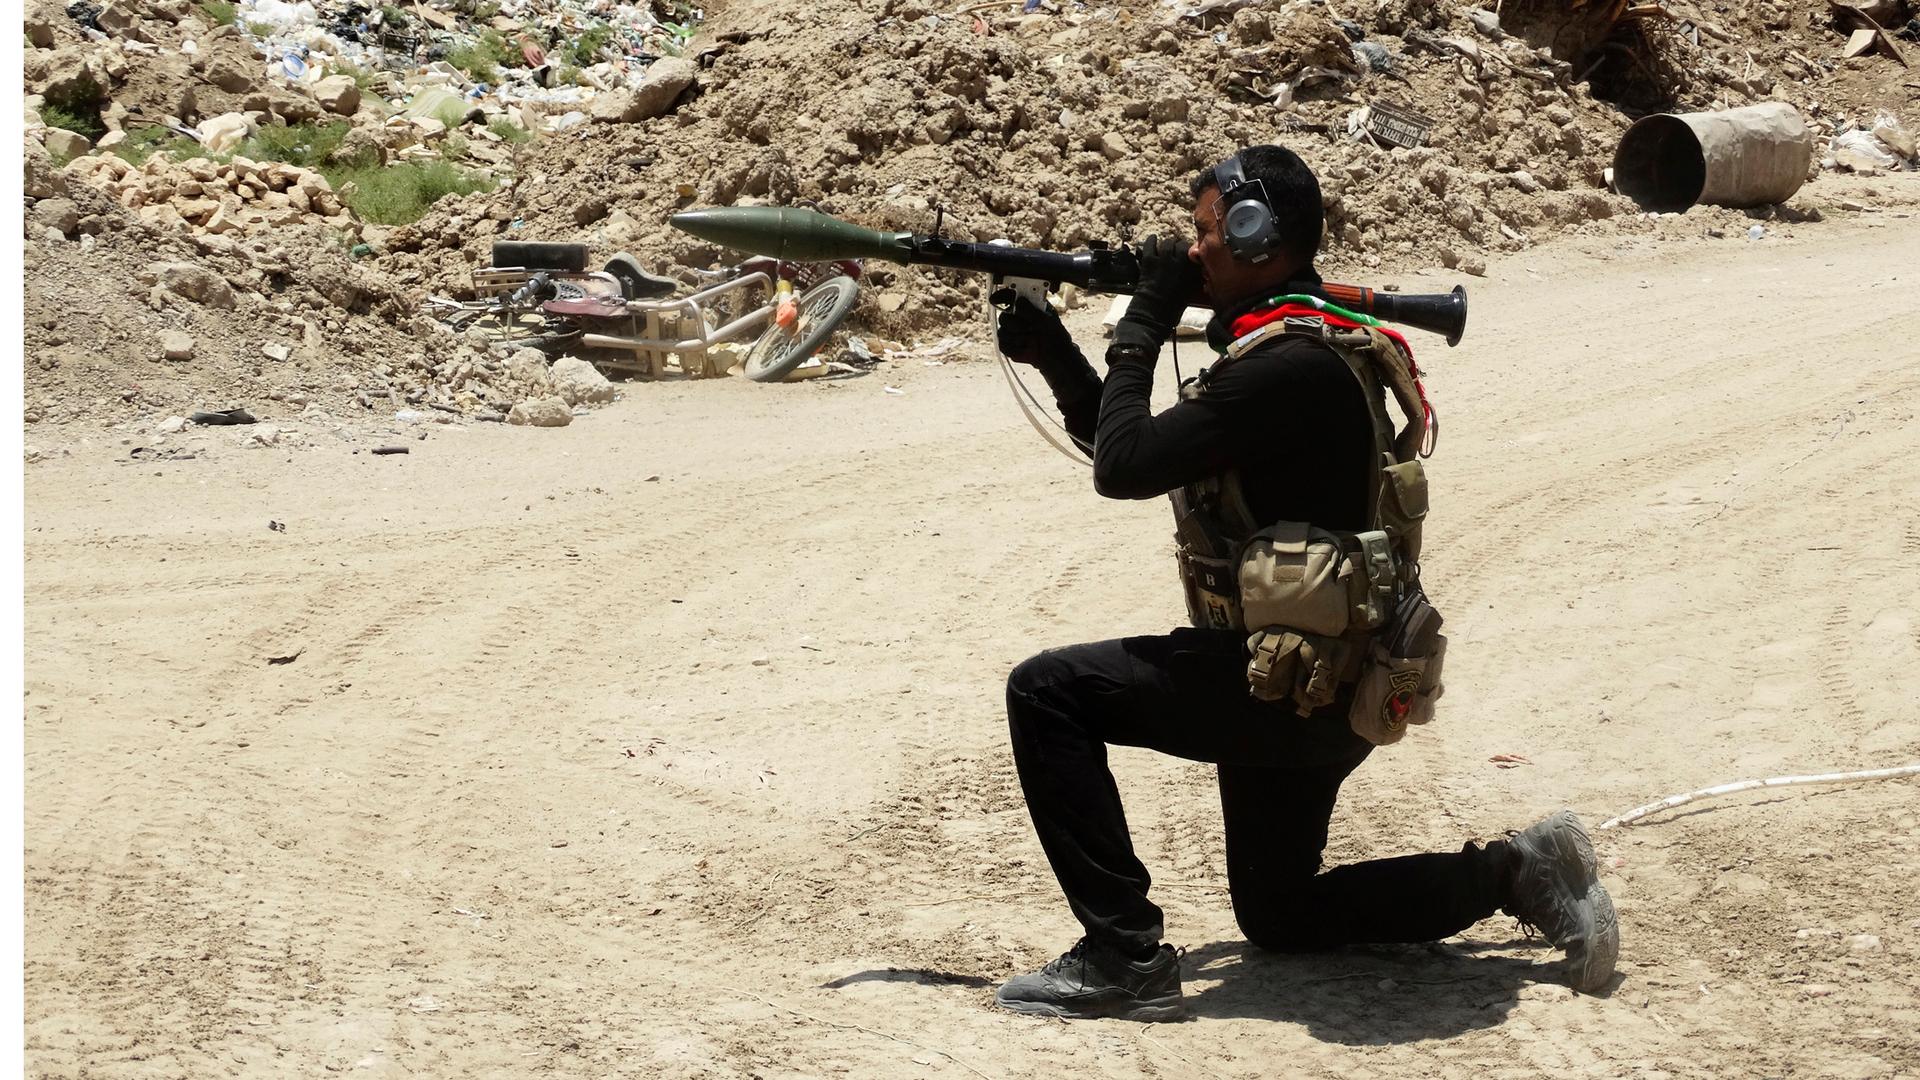 A member of the Iraqi Special Operations Forces (ISOF) takes his position during a patrol looking for militants of the Islamic State, formerly known as the Islamic State of Iraq and the Levant (ISIL), in a neighborhood in Ramadi, July 23, 2014.